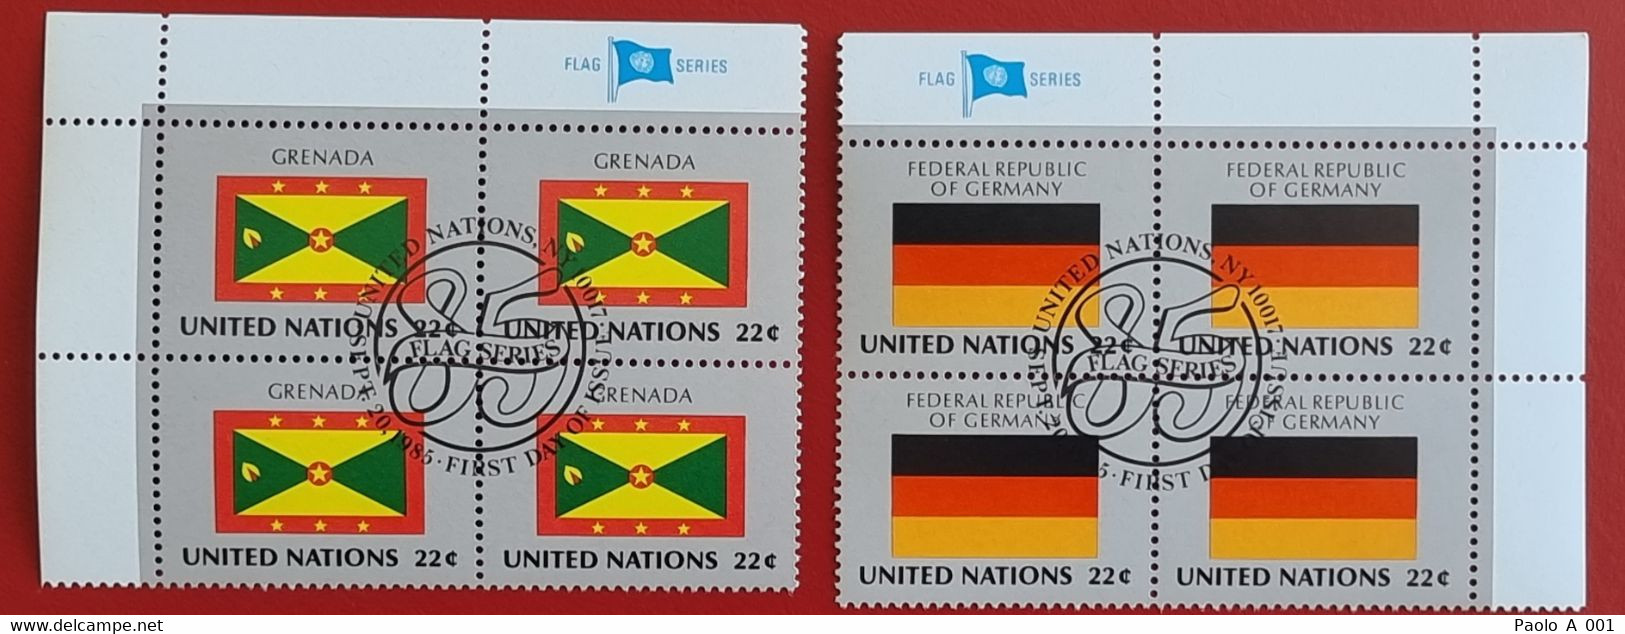 UNO NEW YORK 1985 DEUTSCHLAND GERMANY EUROPE GRENADA AMERICA FLAG OF NATIONS BLOC OF FOUR FIRST DAY FULL GUM - Usados